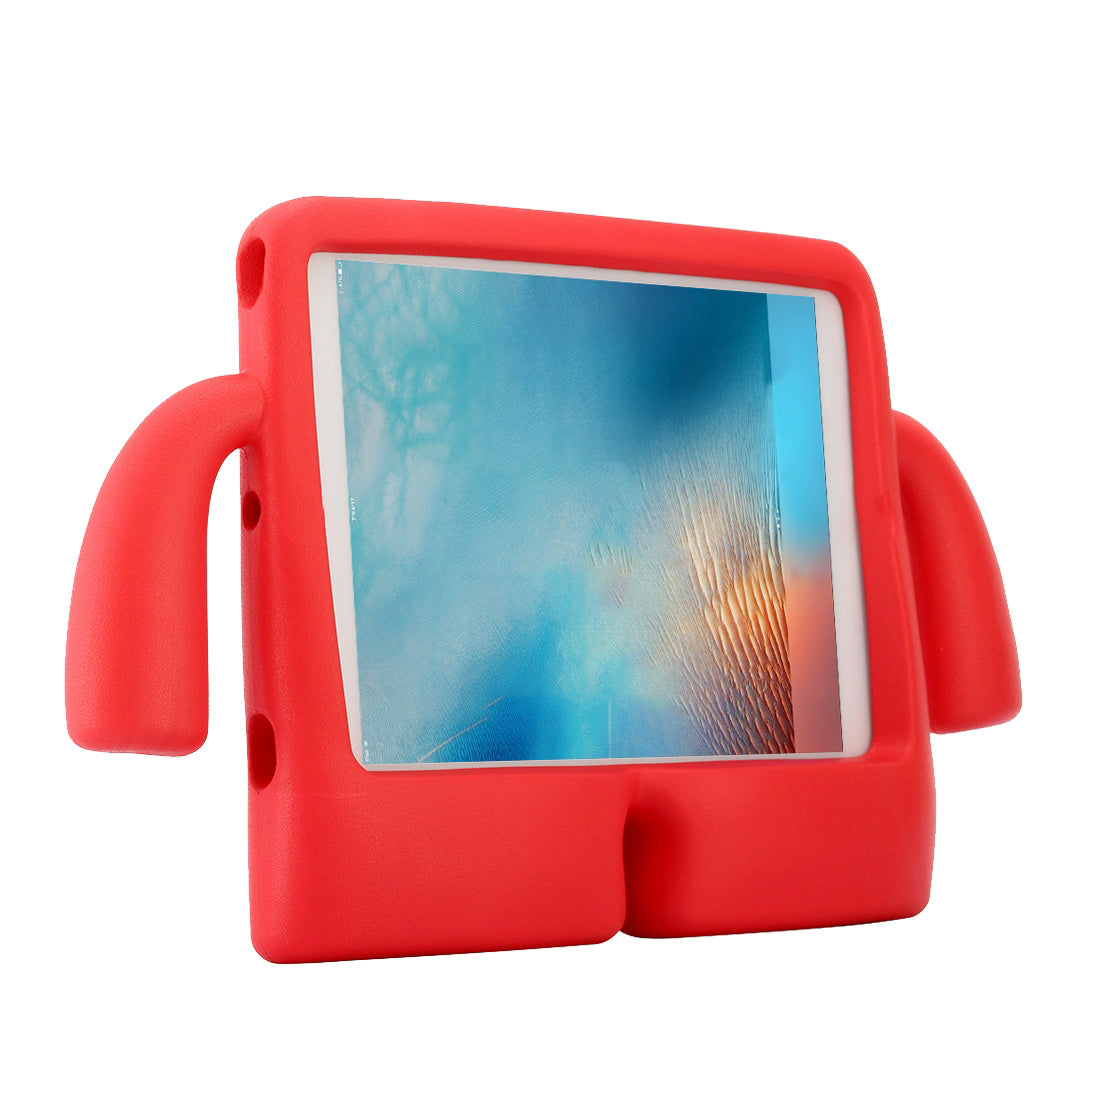 For Apple iPad Mini 4 / 5 Kids Case Shockproof Cover With Carry Handle - Red